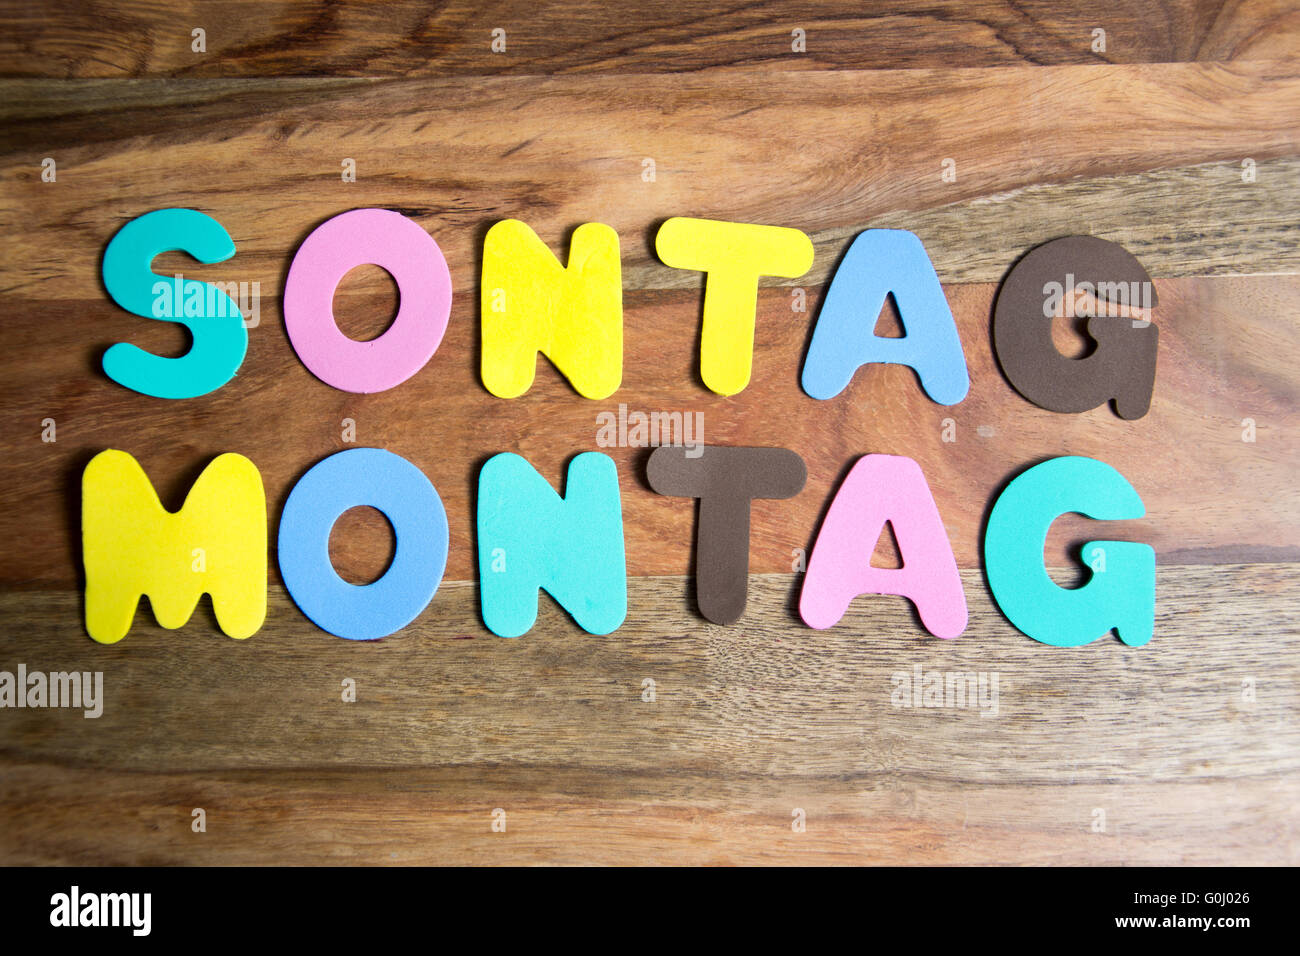 words Sonntag and Montag formed by colorful letters Stock Photo